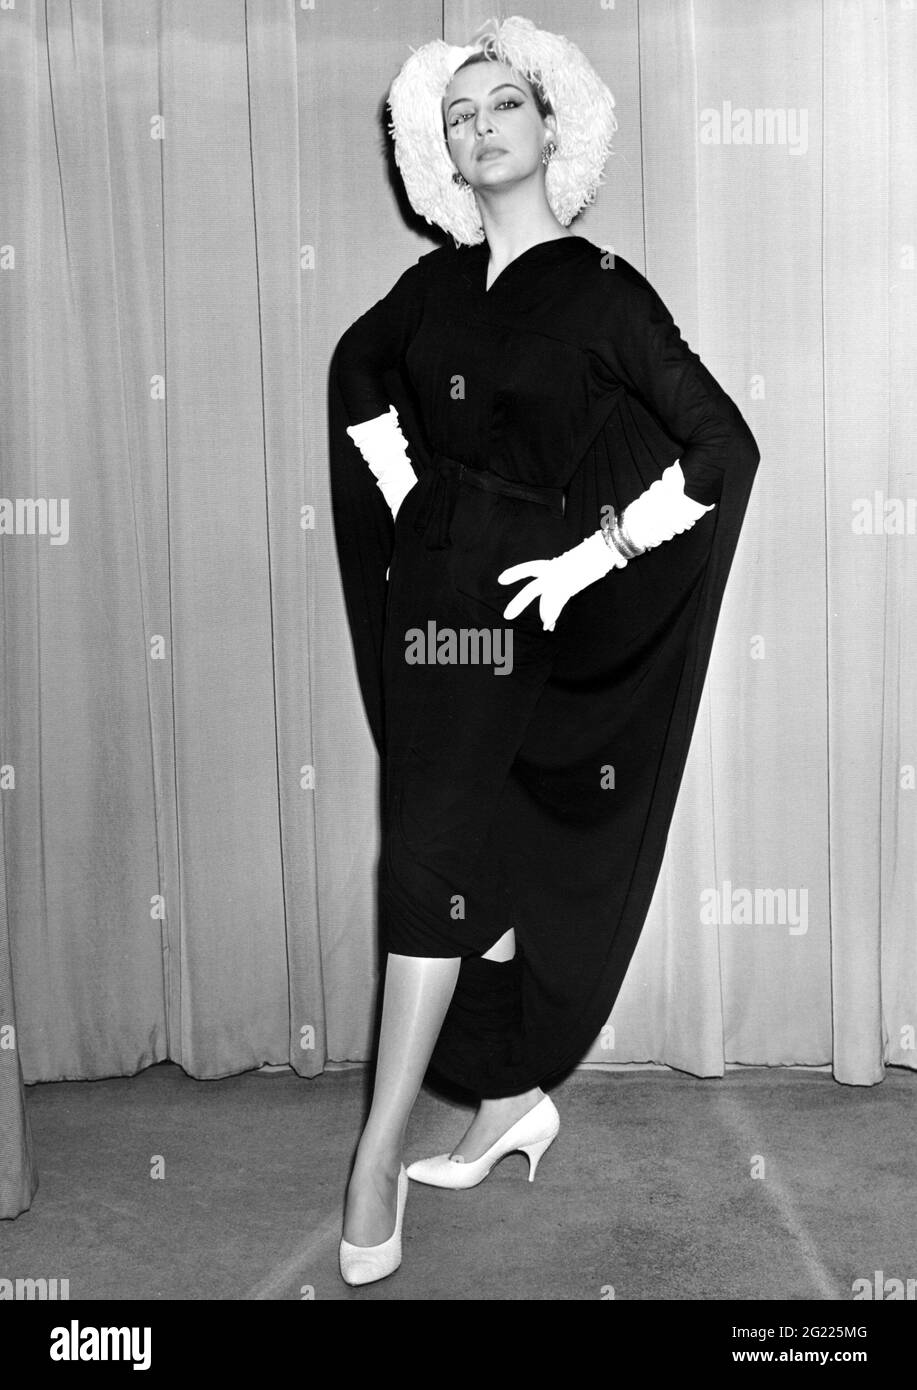 fashion, 1950s, ladies' fashion, model wearing dress 'Just Fancy' by Norman Hartnell, ADDITIONAL-RIGHTS-CLEARANCE-INFO-NOT-AVAILABLE Stock Photo